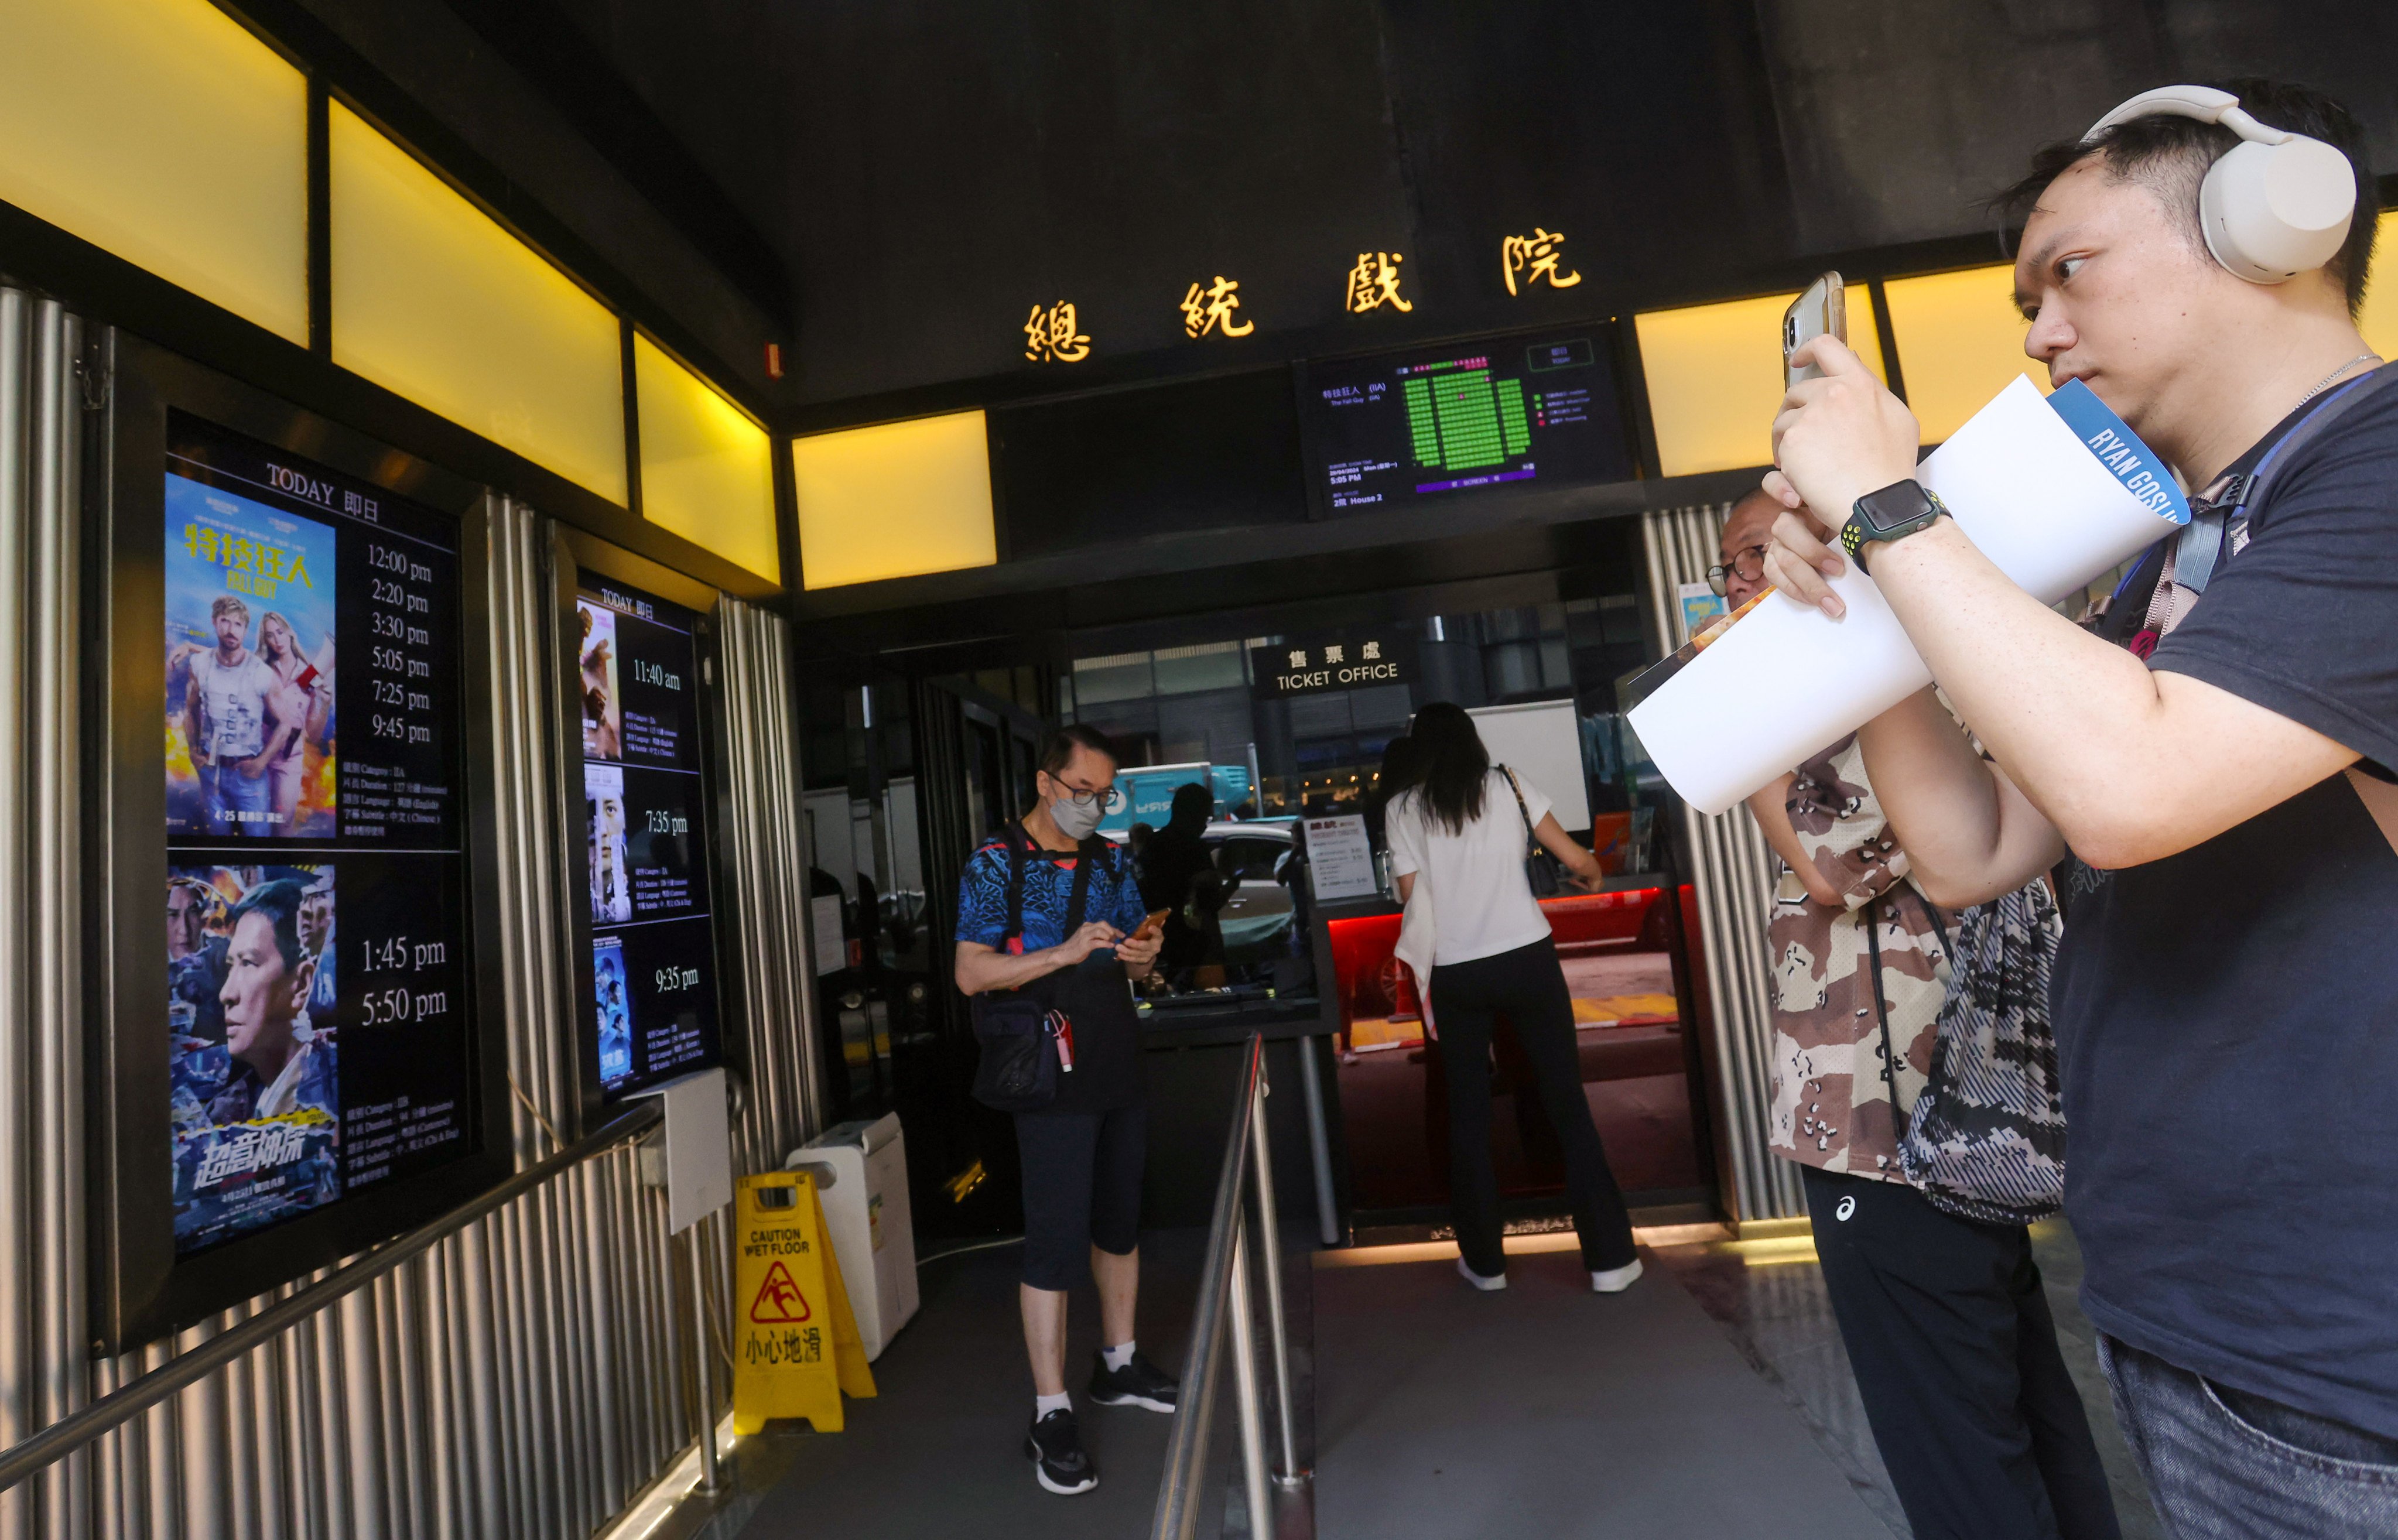 People visit President Theatre in Causeway Bay on Monday. The cinema shut its doors on Tuesday after nearly six decades in business. Photo: Jonathan Wong